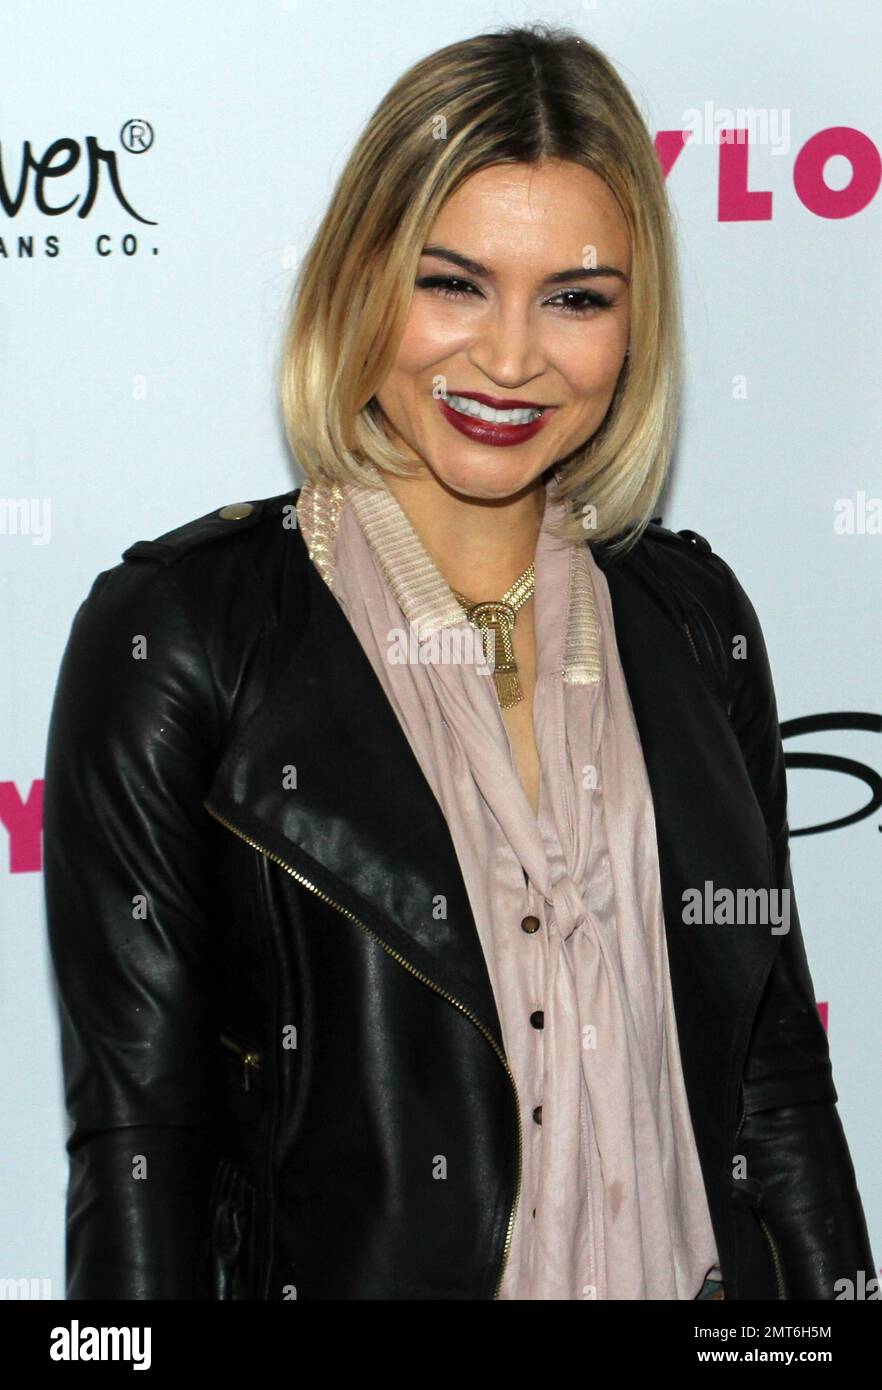 Actress Samaire Armstrong poses for photographers on the red carpet at NYLON magazineÕs 12th anniversary party held at Tru and hosted by the ravishing and beautiful stars of the new epic action fantasy movie "Sucker Punch". Los Angeles, CA. 03/24/11. Stock Photo